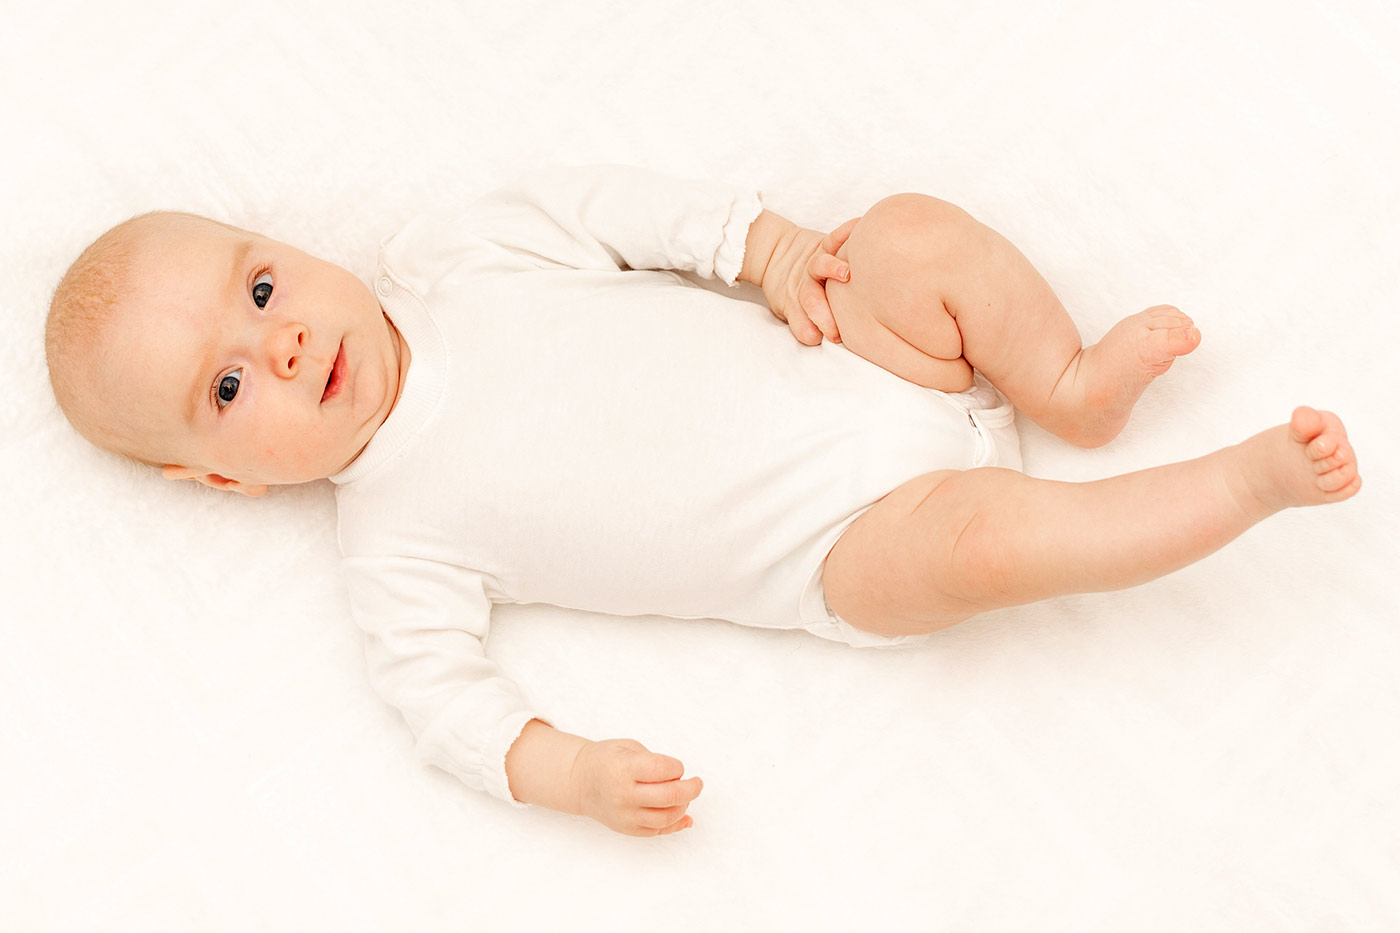 What Should Baby Wear at Night?